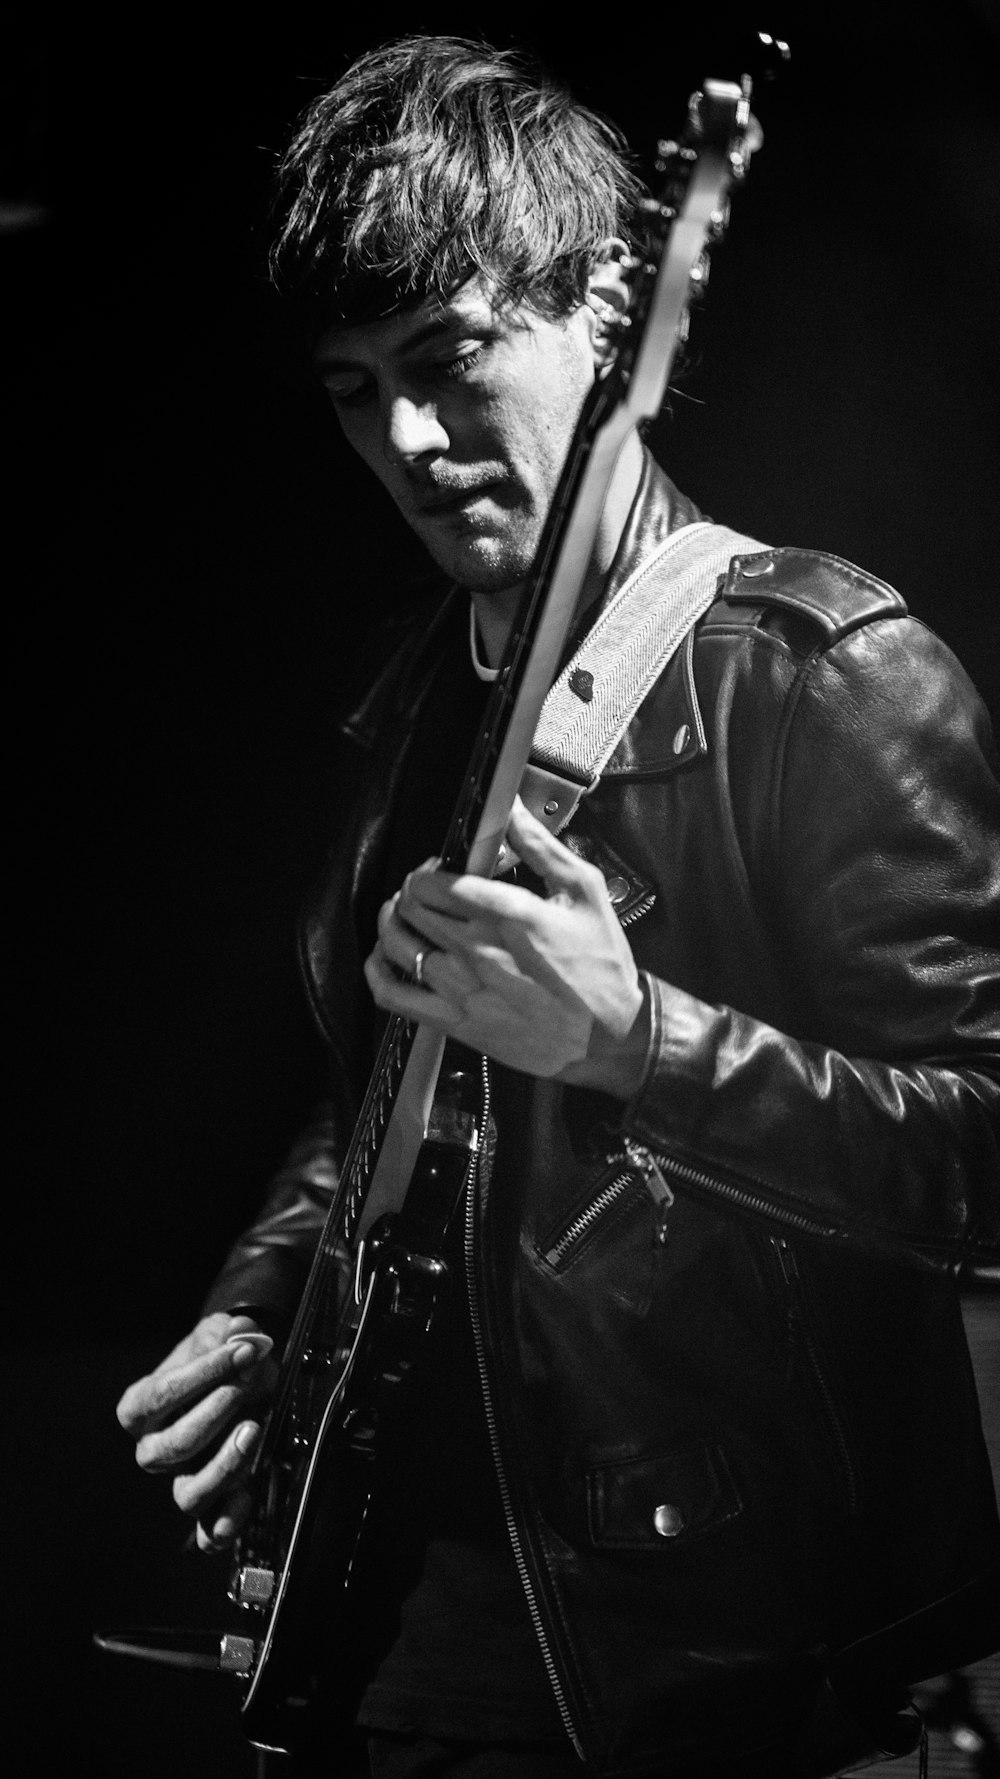 man in black leather jacket holding guitar